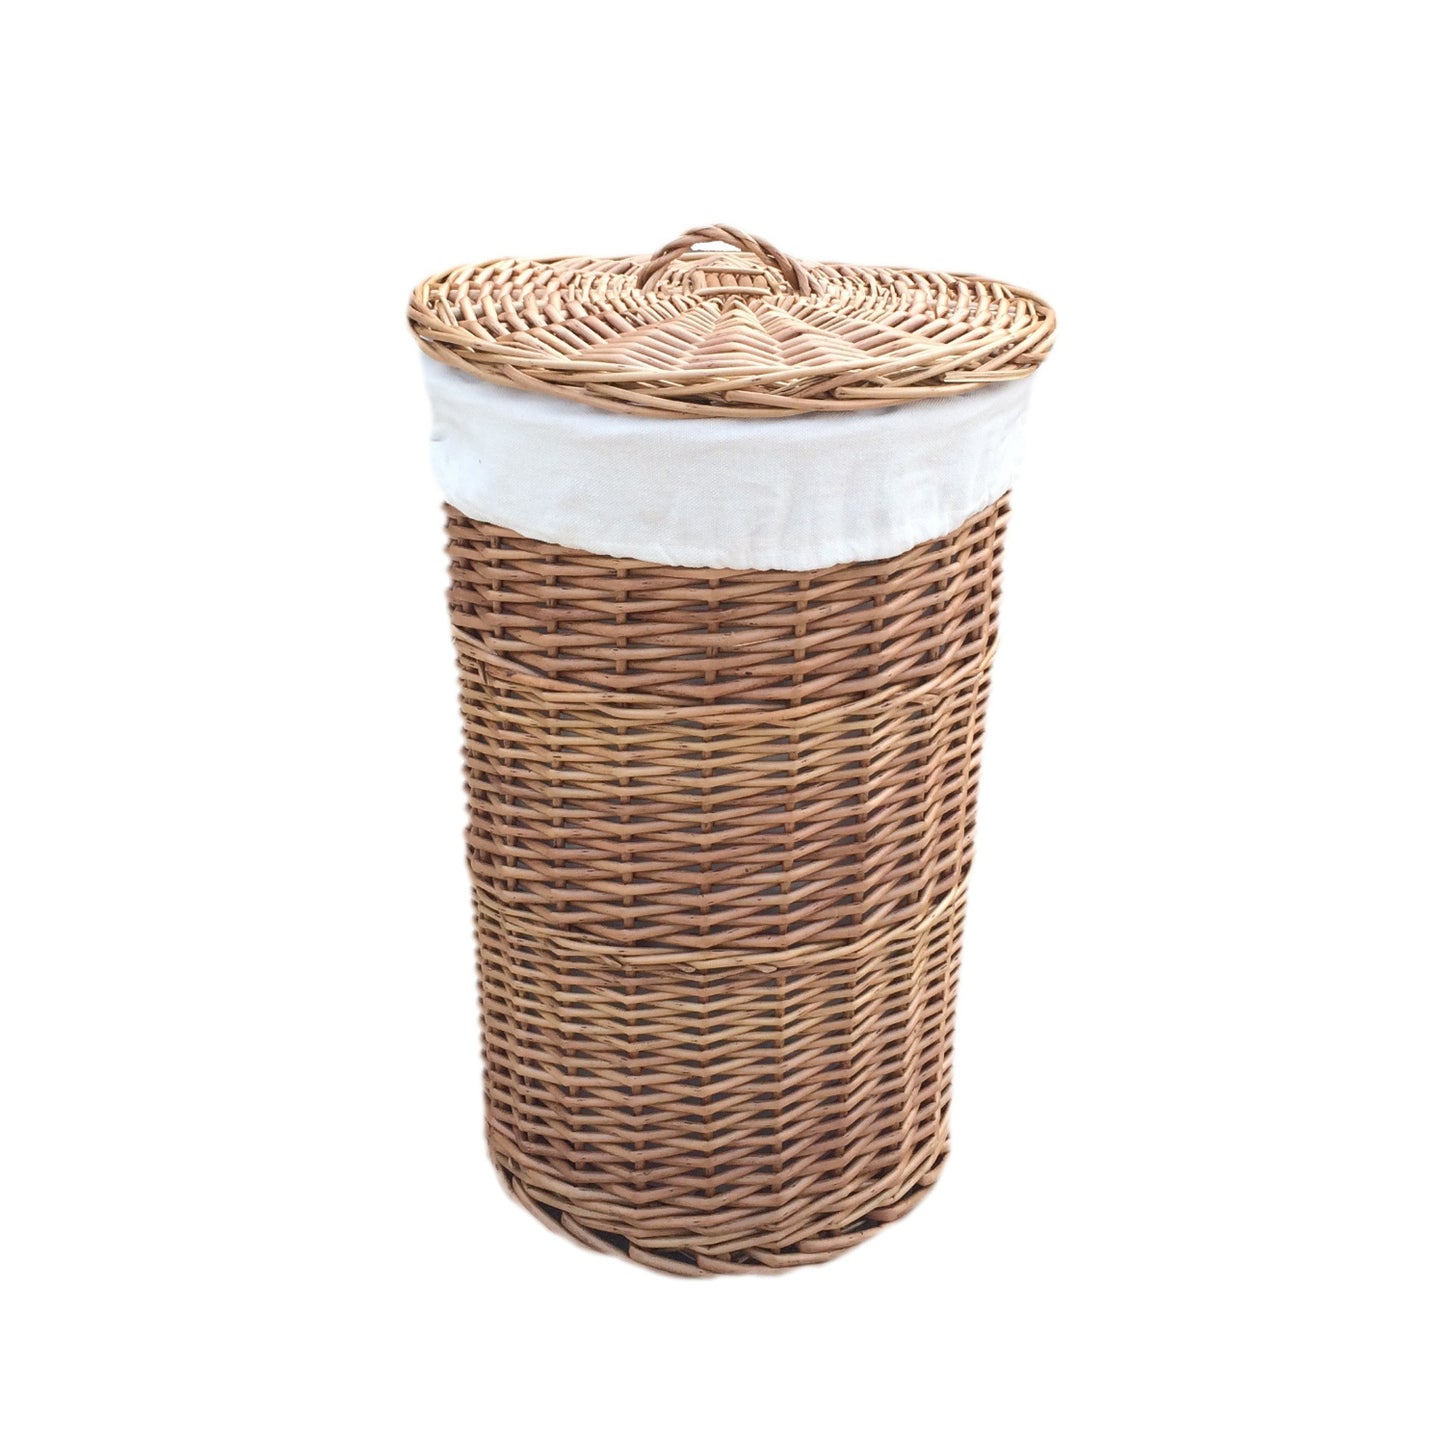 Small Light Steamed Round Linen Basket With White Lining